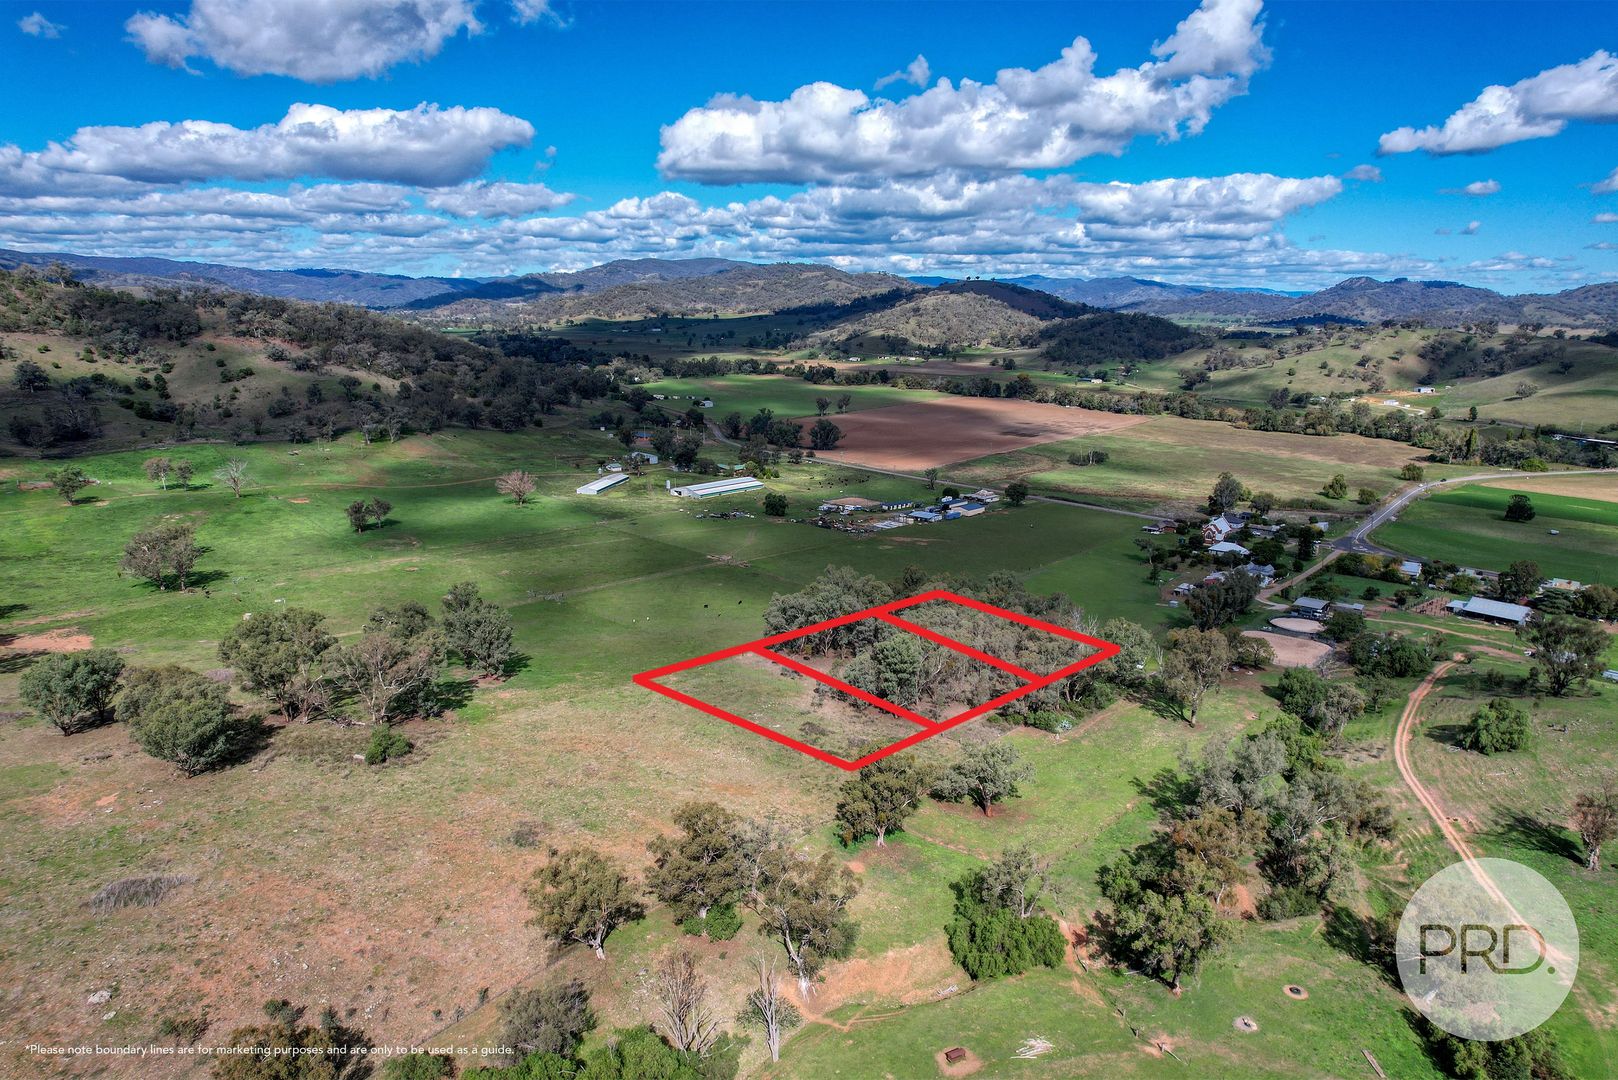 Lot 6 DP 24002 Commons Road, Nundle Road, Dungowan NSW 2340, Image 1